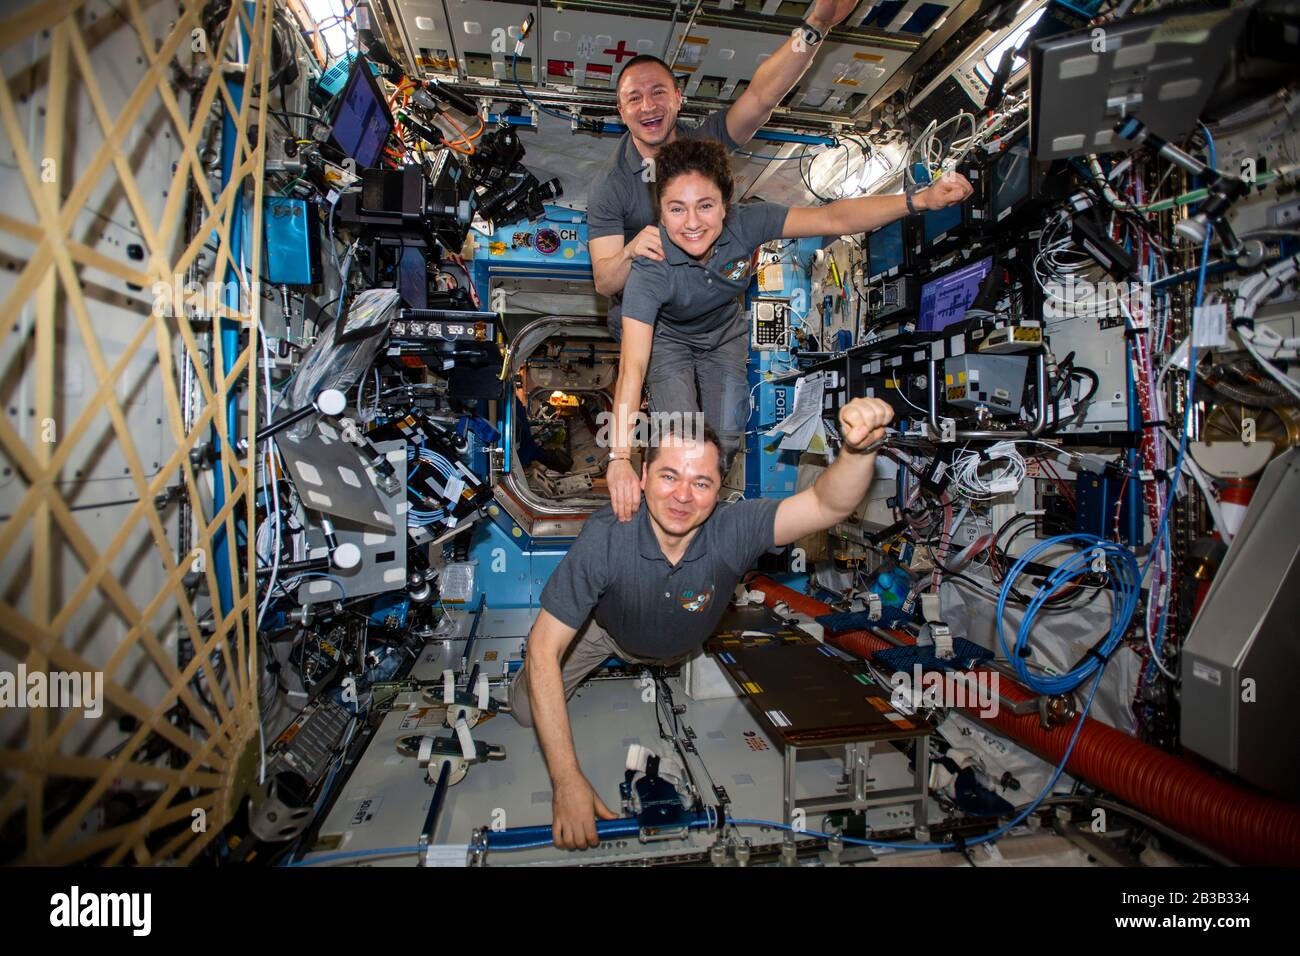 ISS - 20 Feb 2020 - The Expedition 62 crew poses for a playful portrait aboard the International Space Station's U.S. Destiny laboratory module. From Stock Photo